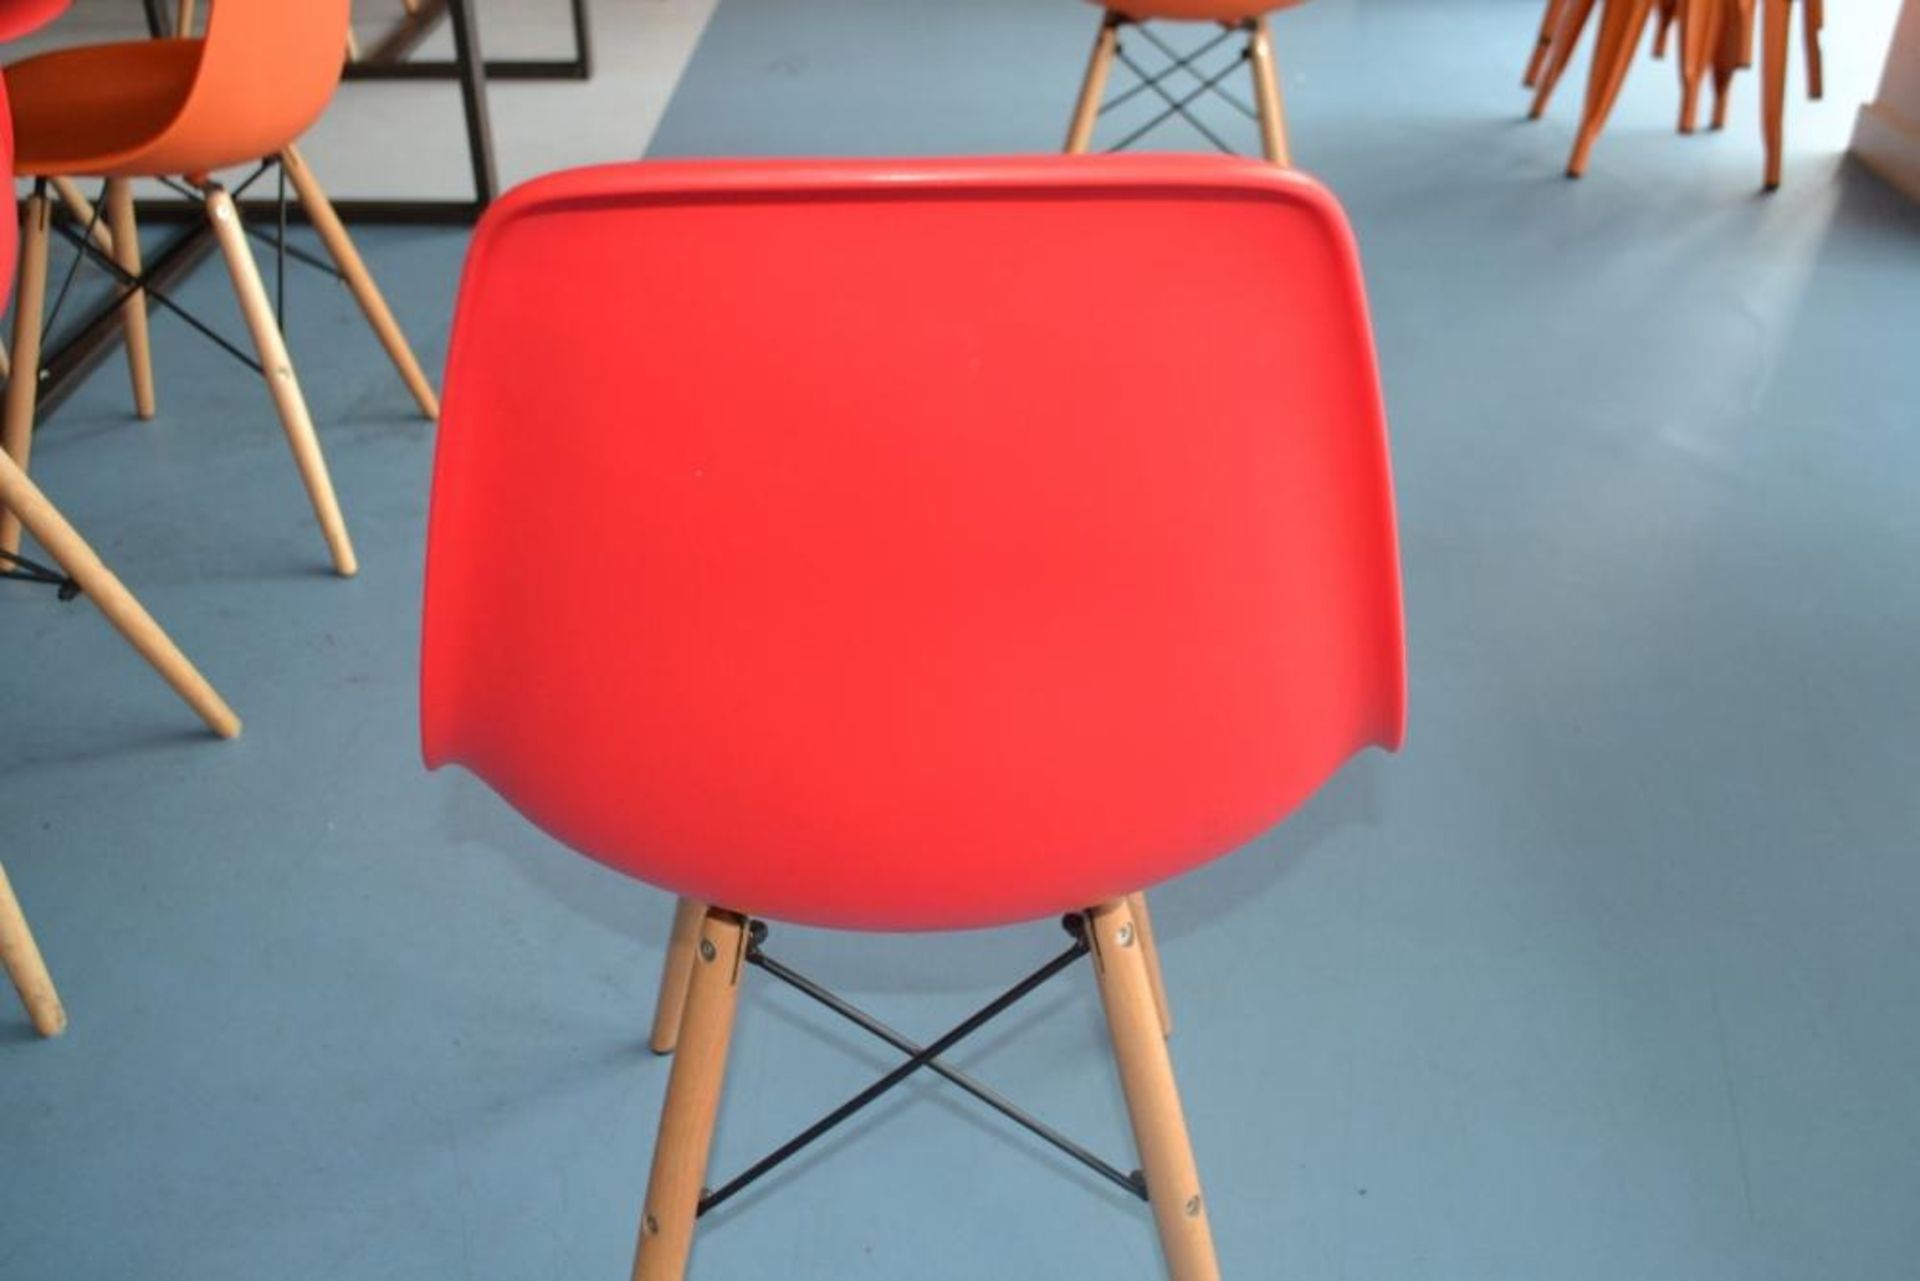 12 x Children's Orange and Red Charles and Ray Eames Style Shell Chairs - CL425 - Location: Altrinch - Image 2 of 8